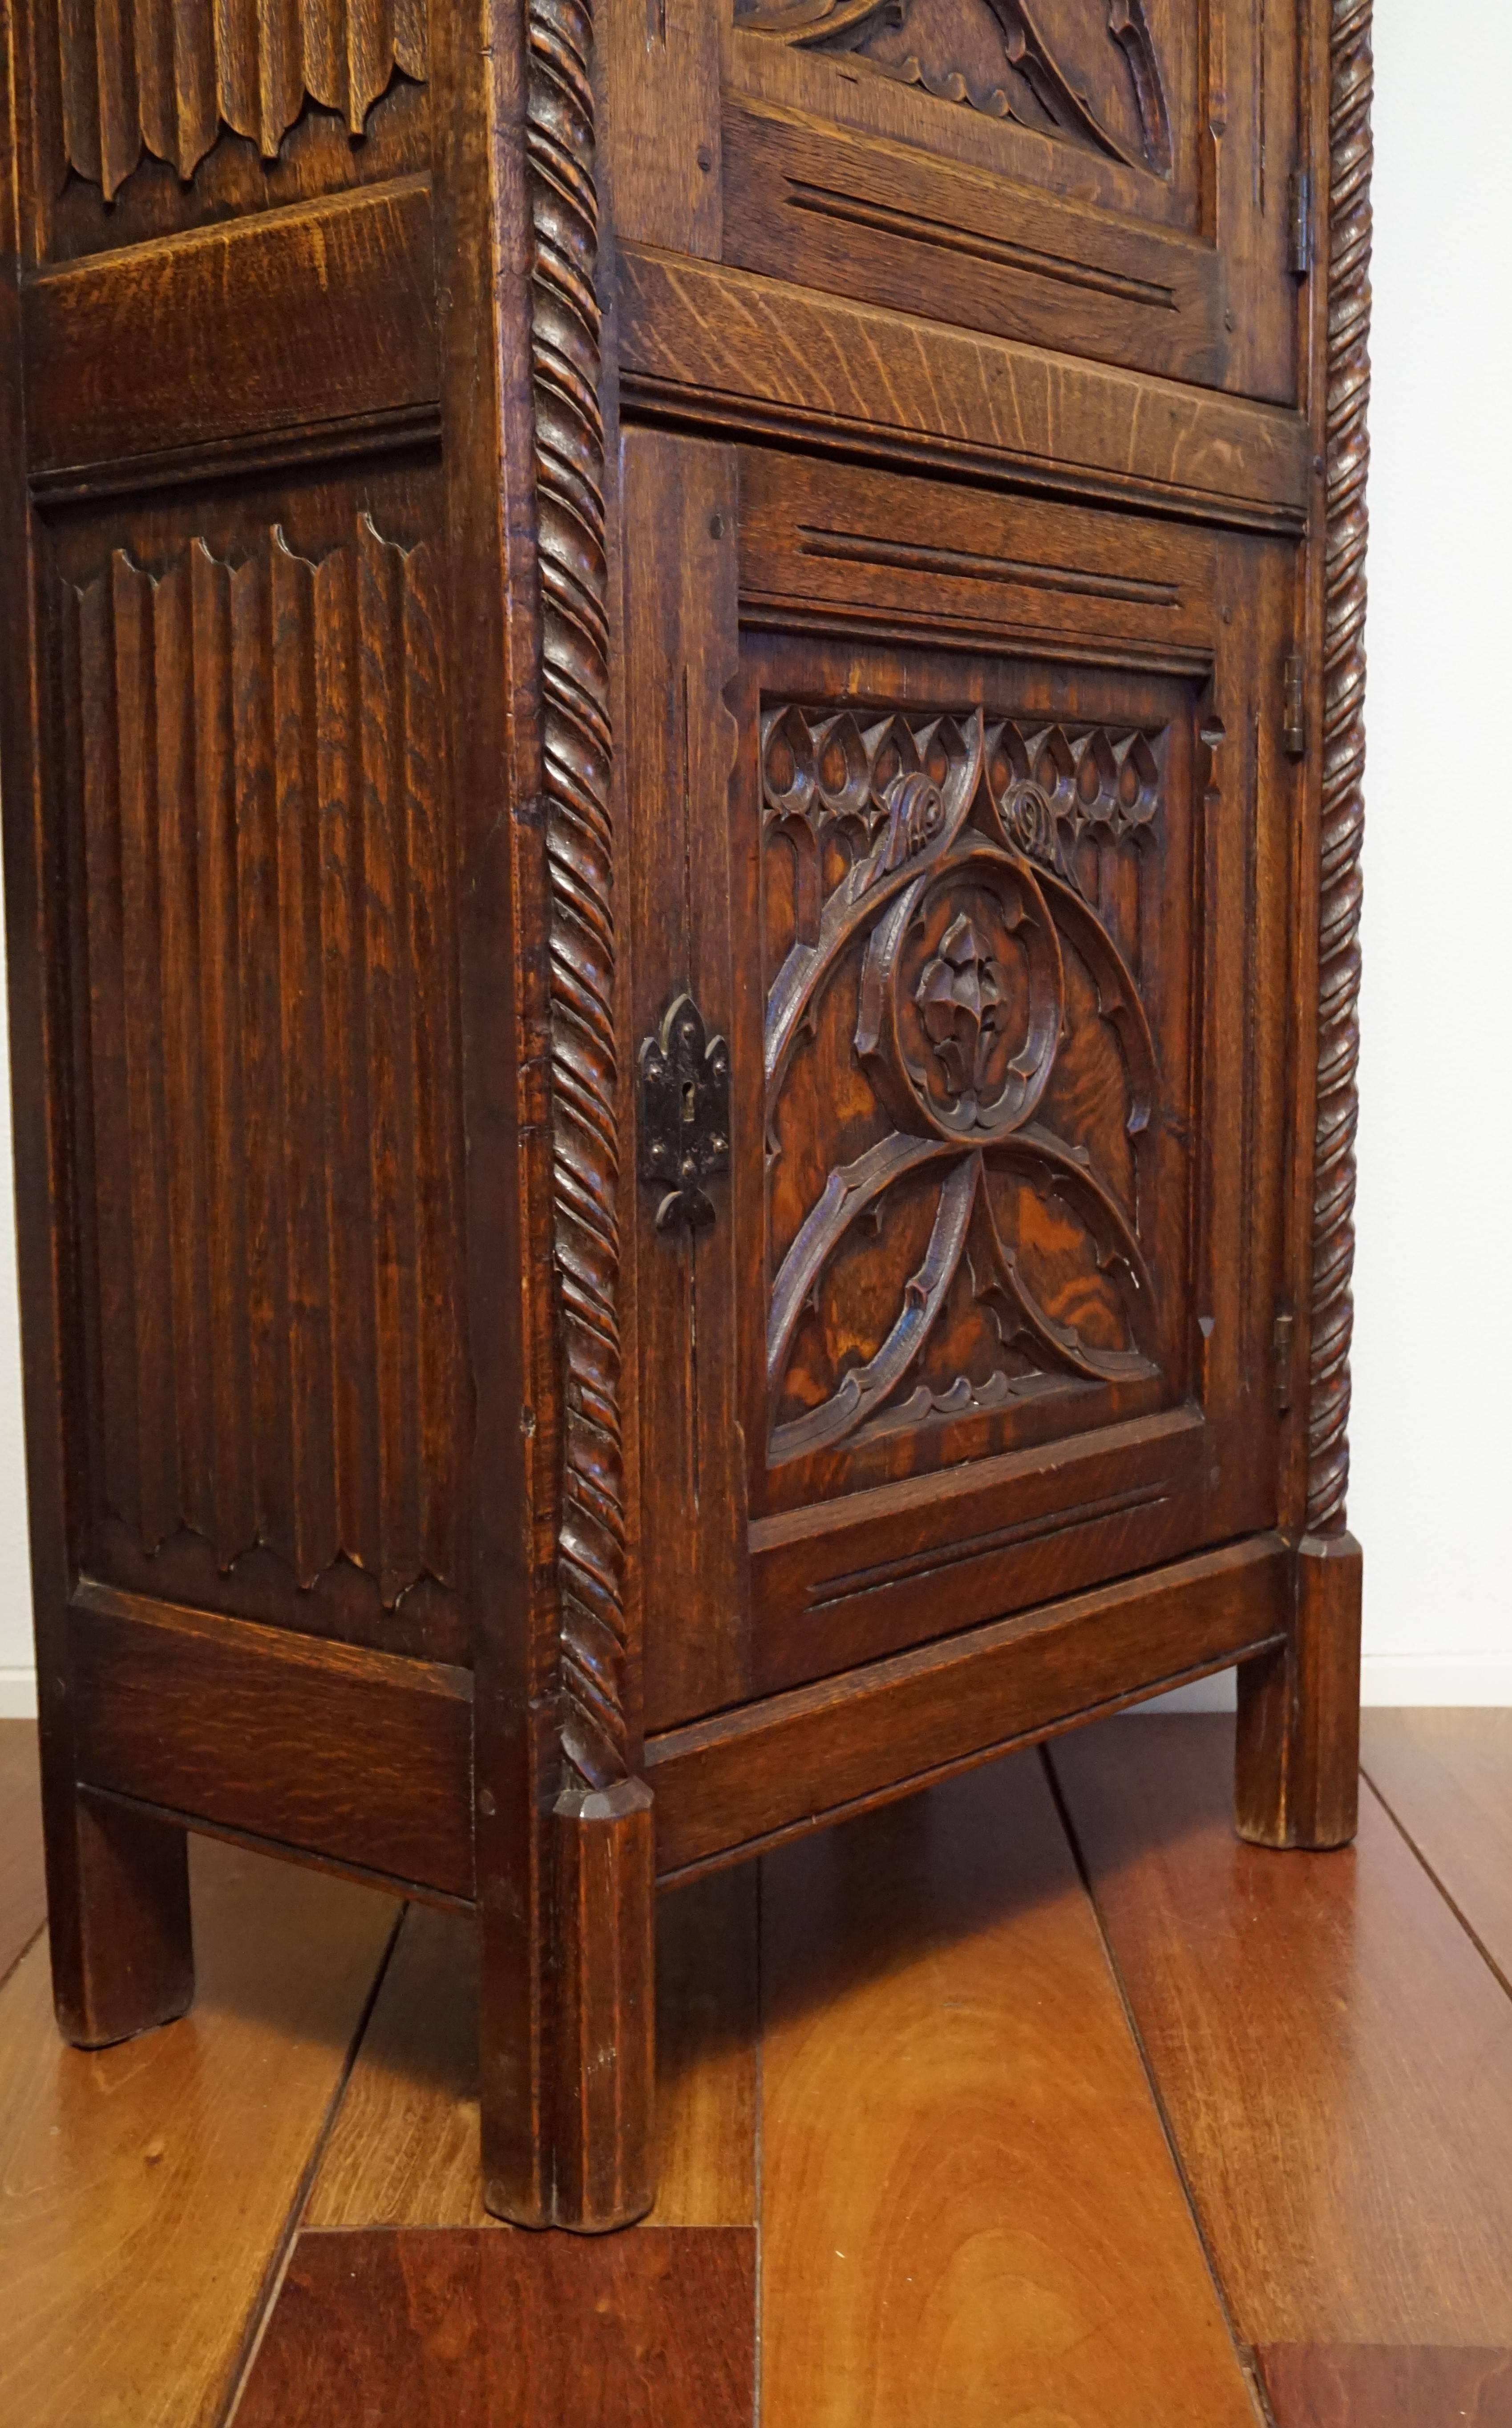 20th Century Gothic Revival Bookcase Carved Antique Cabinet with Wrought Iron Lock Plates